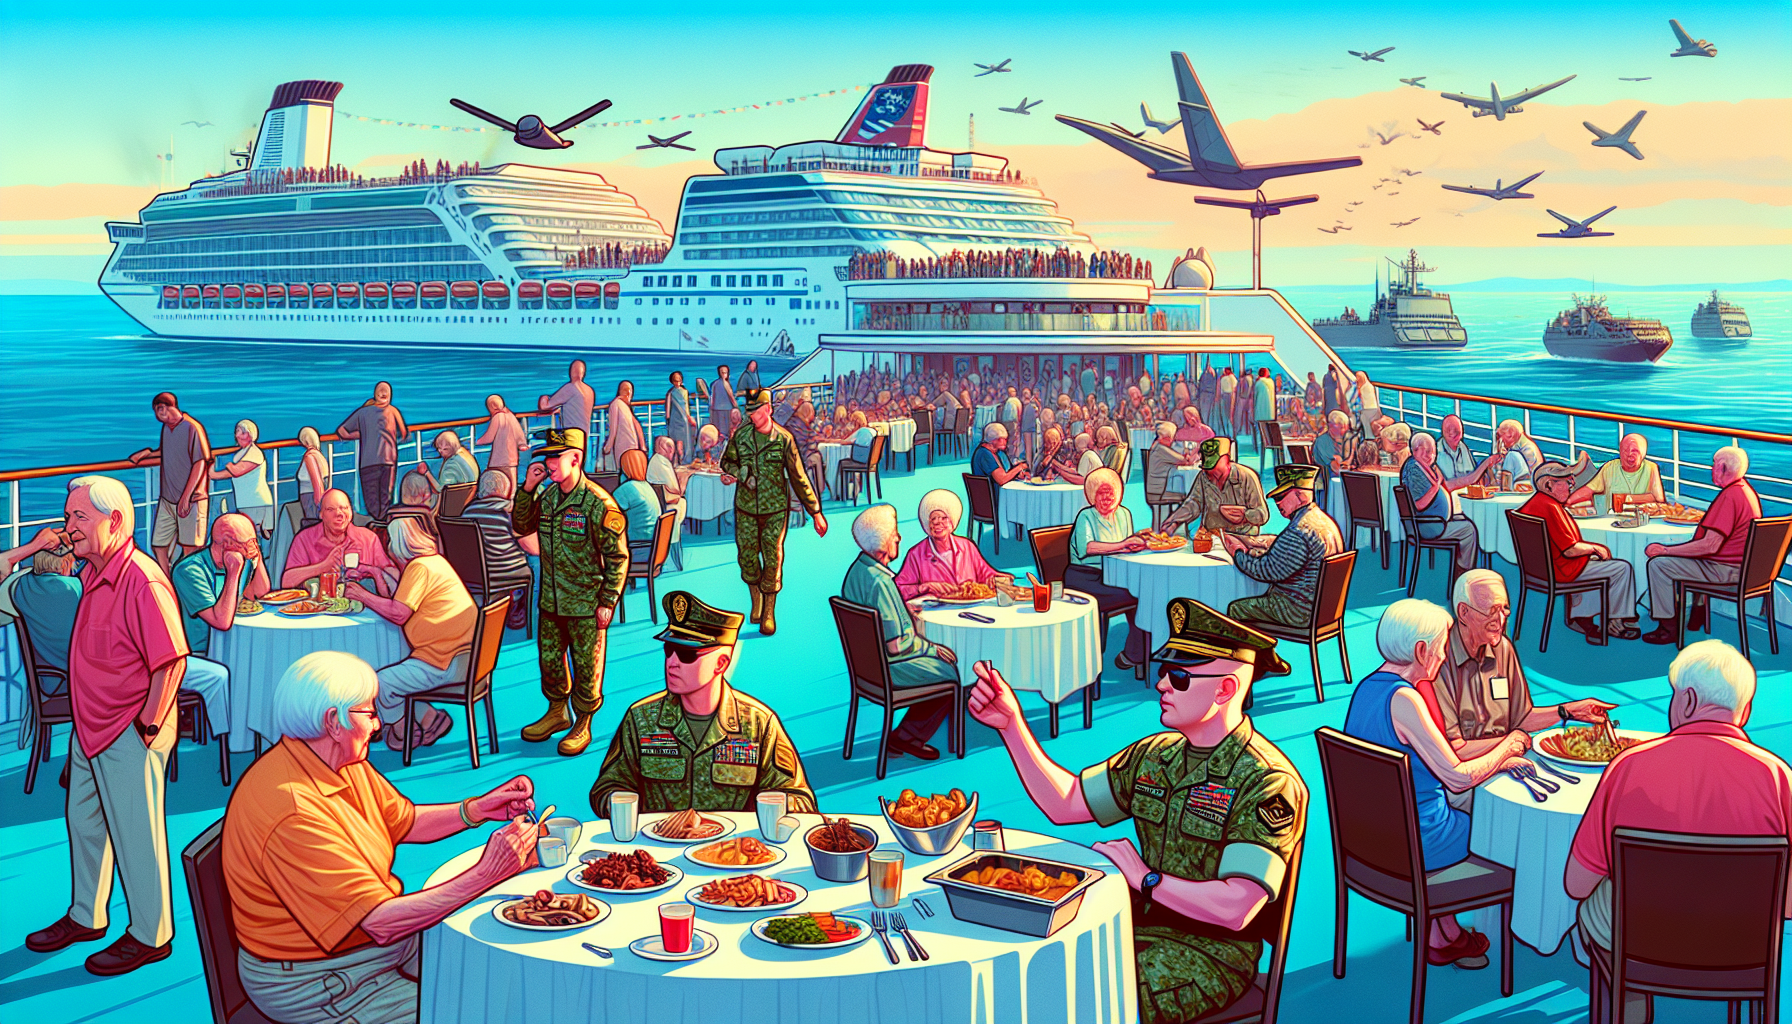 Honoring Military Veterans on a Memorable Cruise